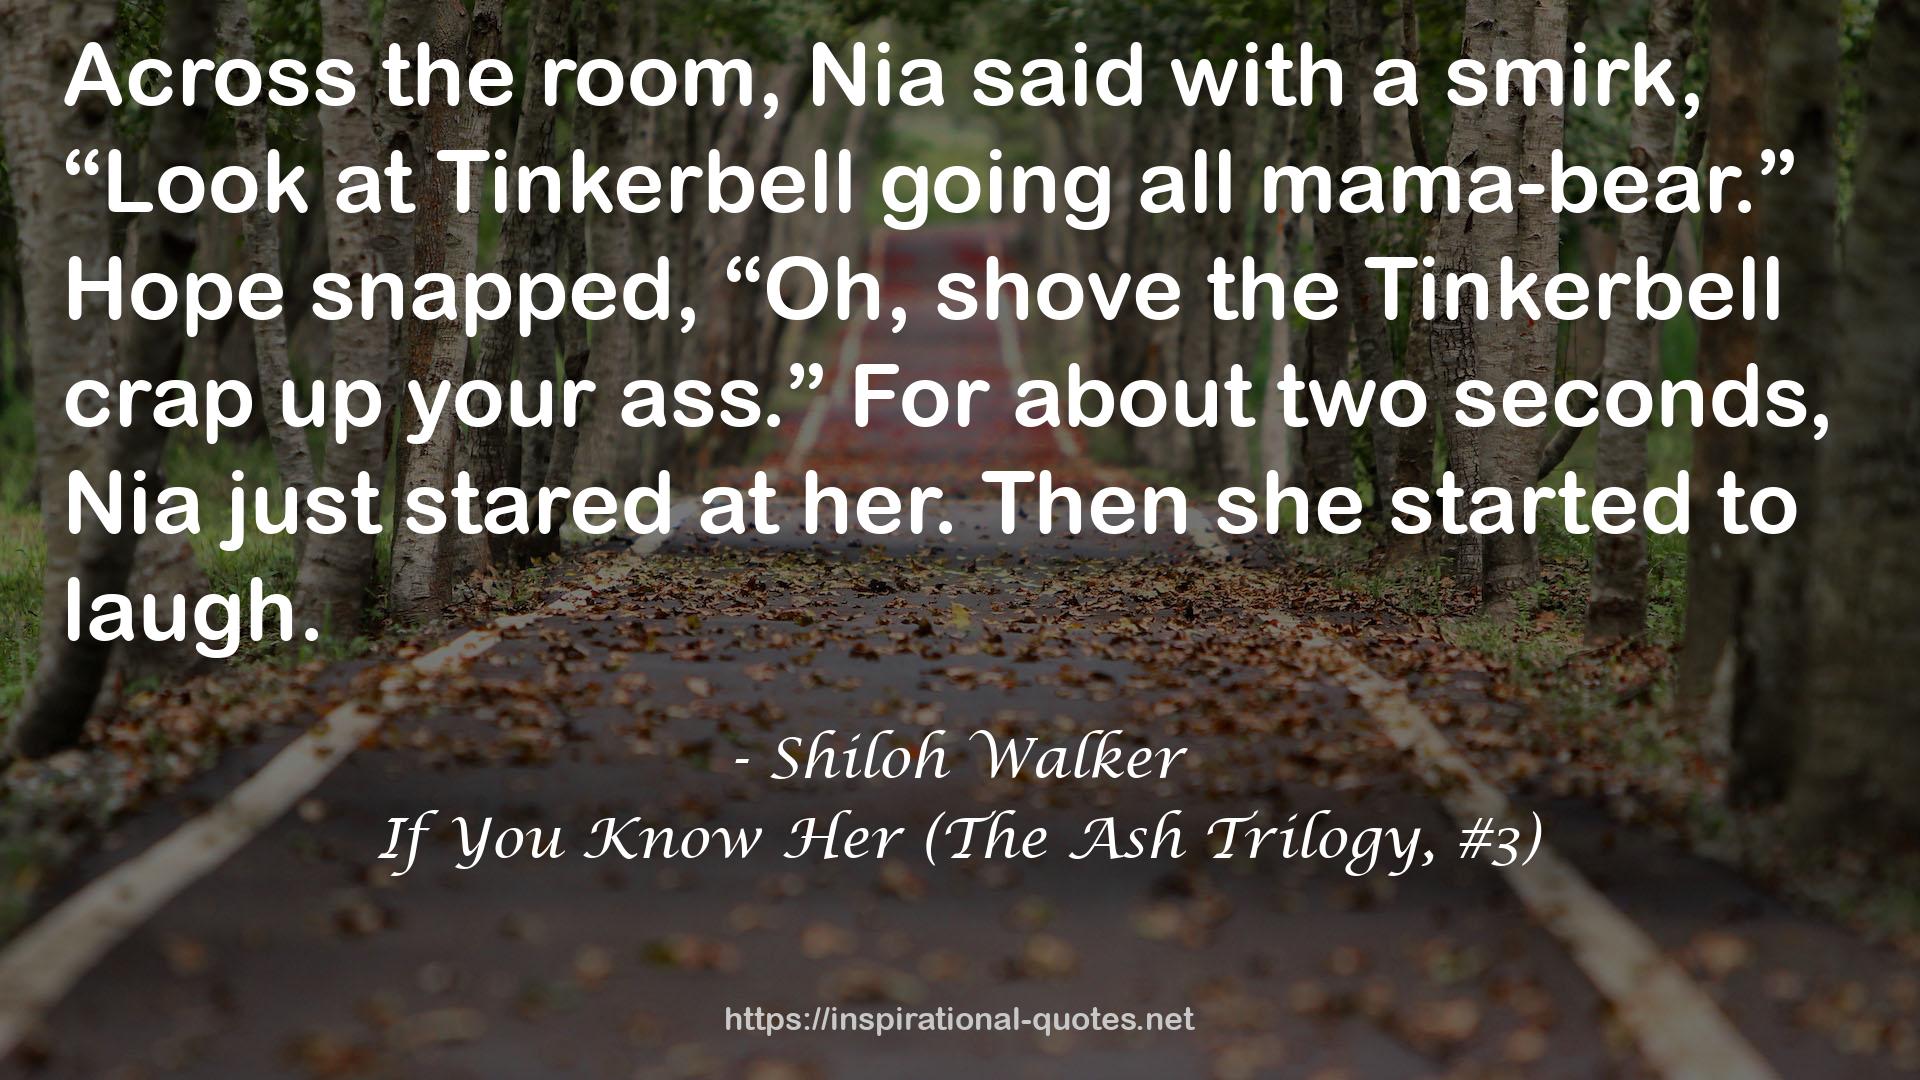 If You Know Her (The Ash Trilogy, #3) QUOTES